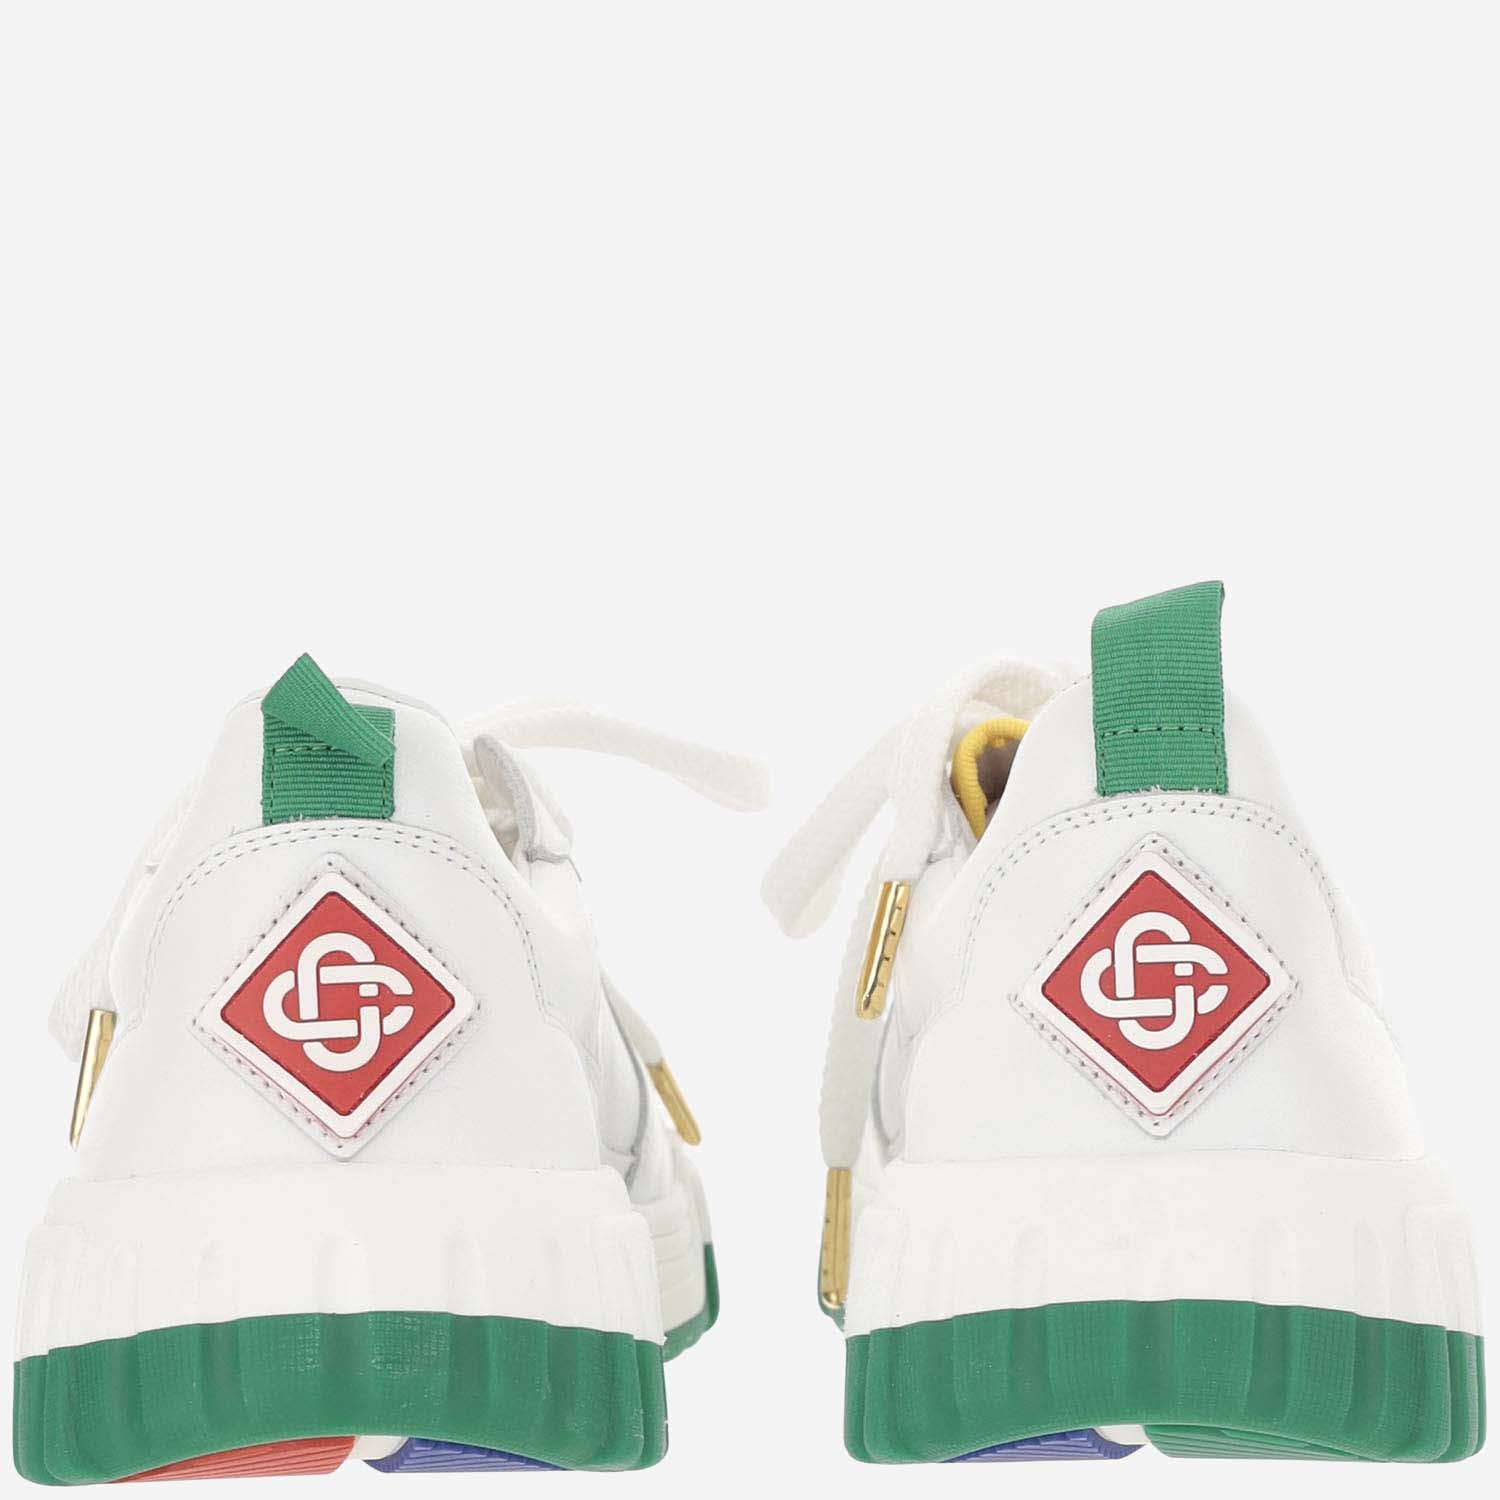 Shop Casablanca Leather Sneakers With Logo In White/green